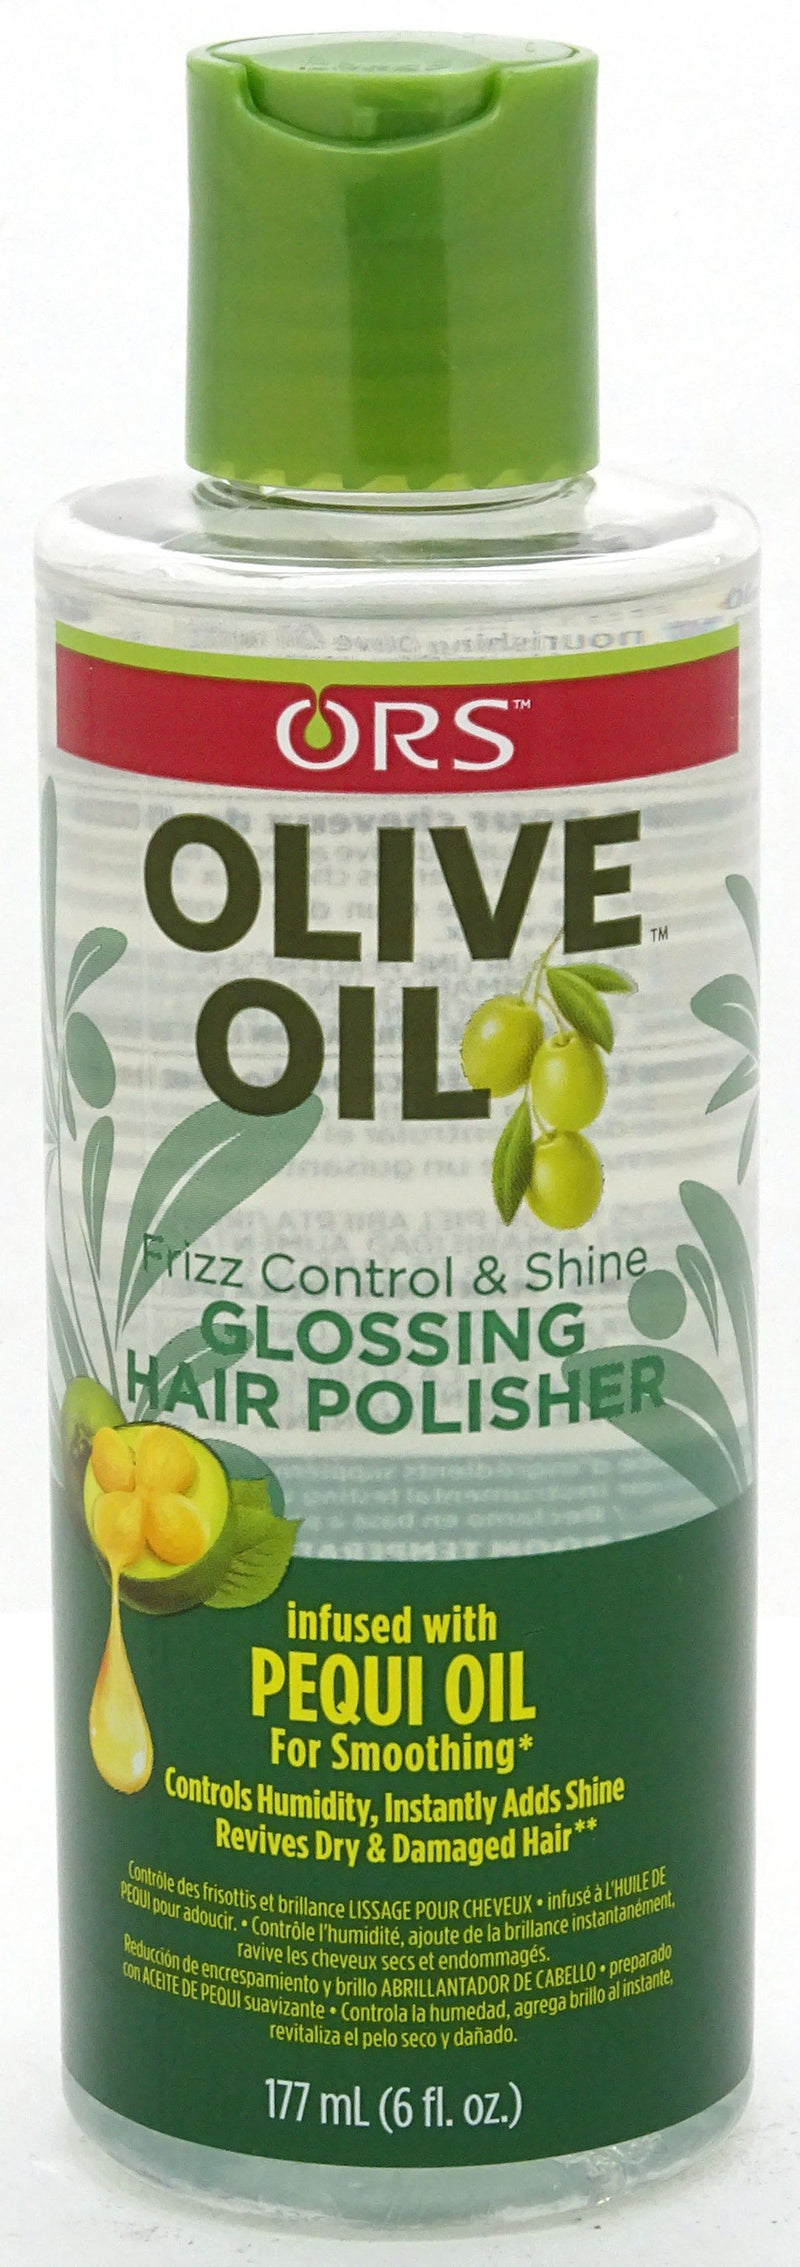 ORS Olive Oil Glossing Hair Polisher 177ml  | gtworld.be 